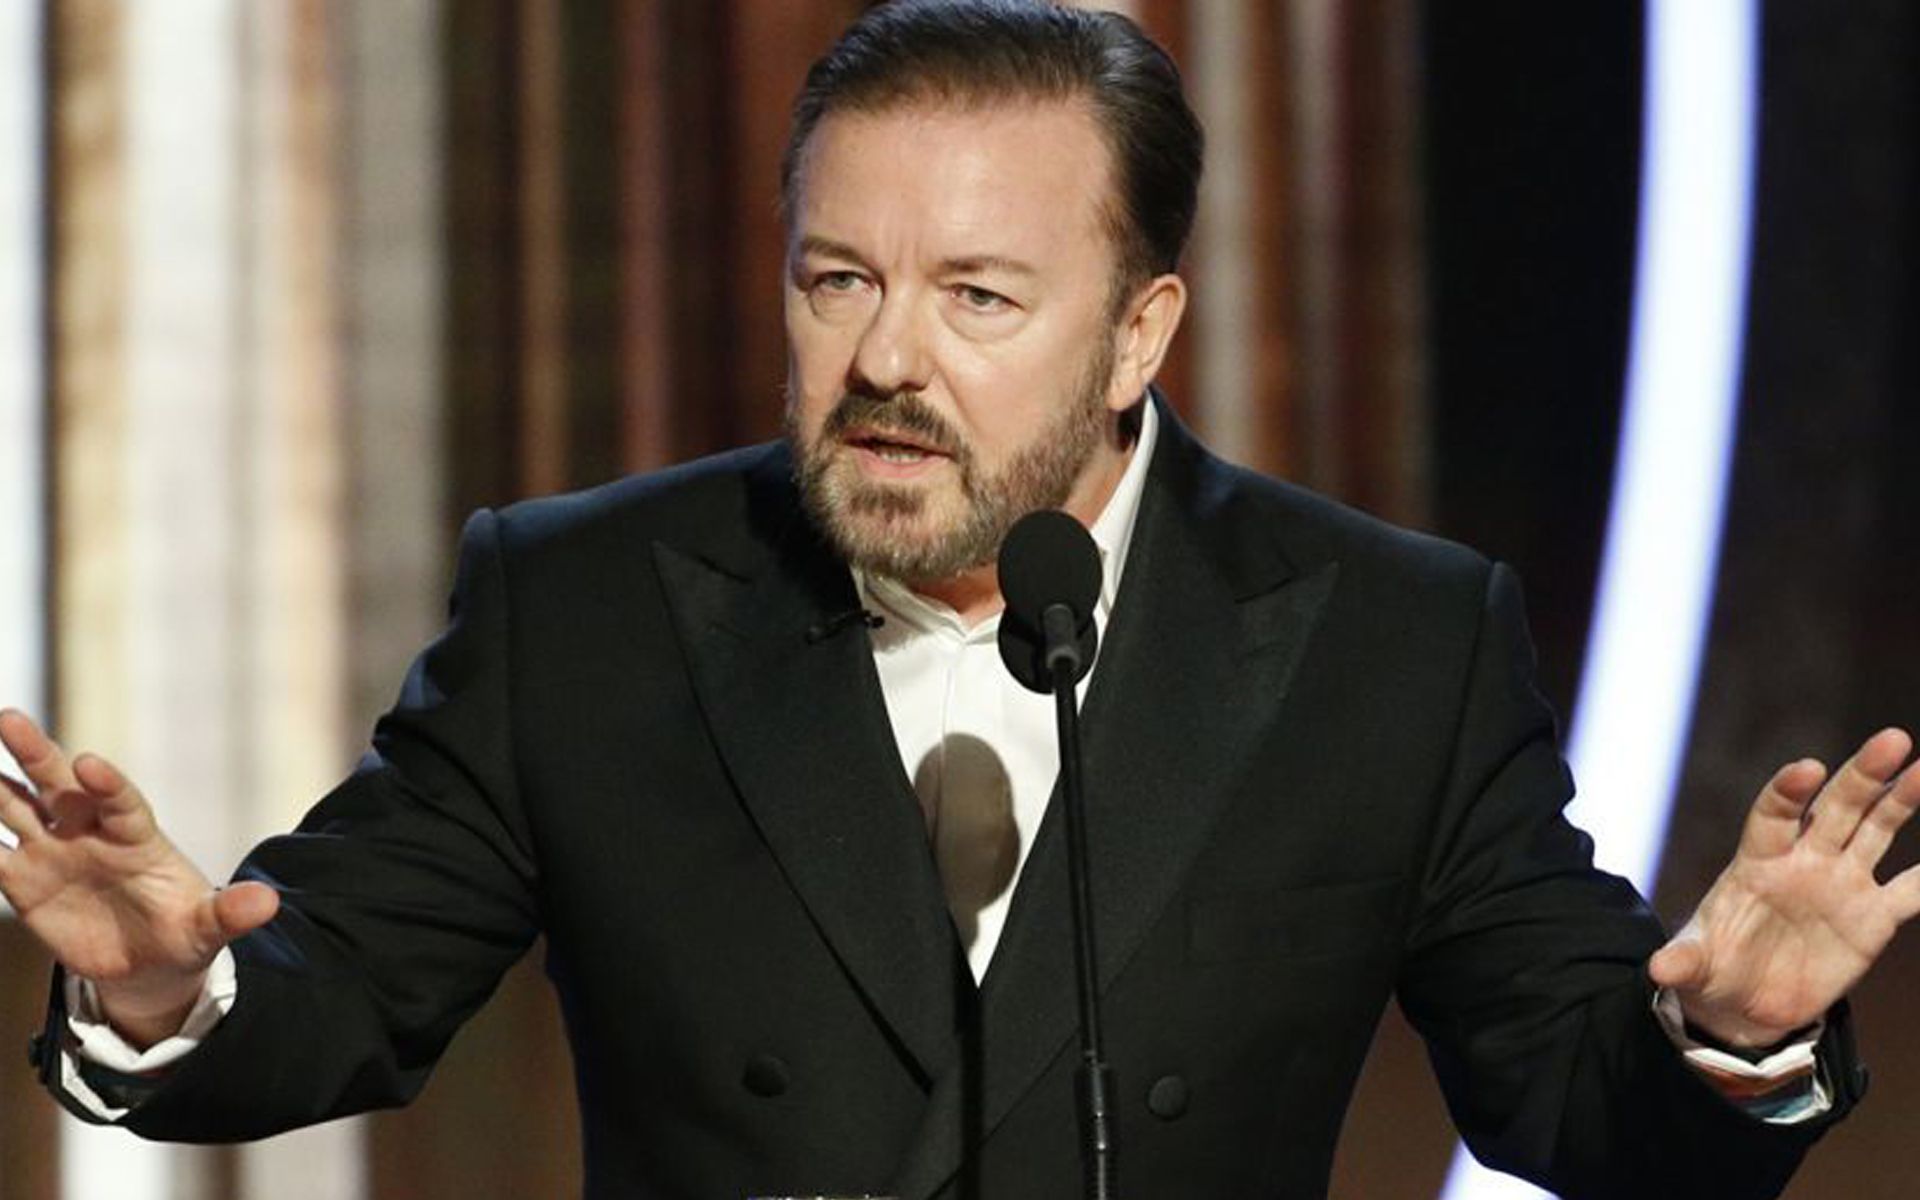 Ricky Gervais, 58, Found Dead By Apparent Suicide After Completely Unrelated Roasting Of Hollywood Pedophile Elite